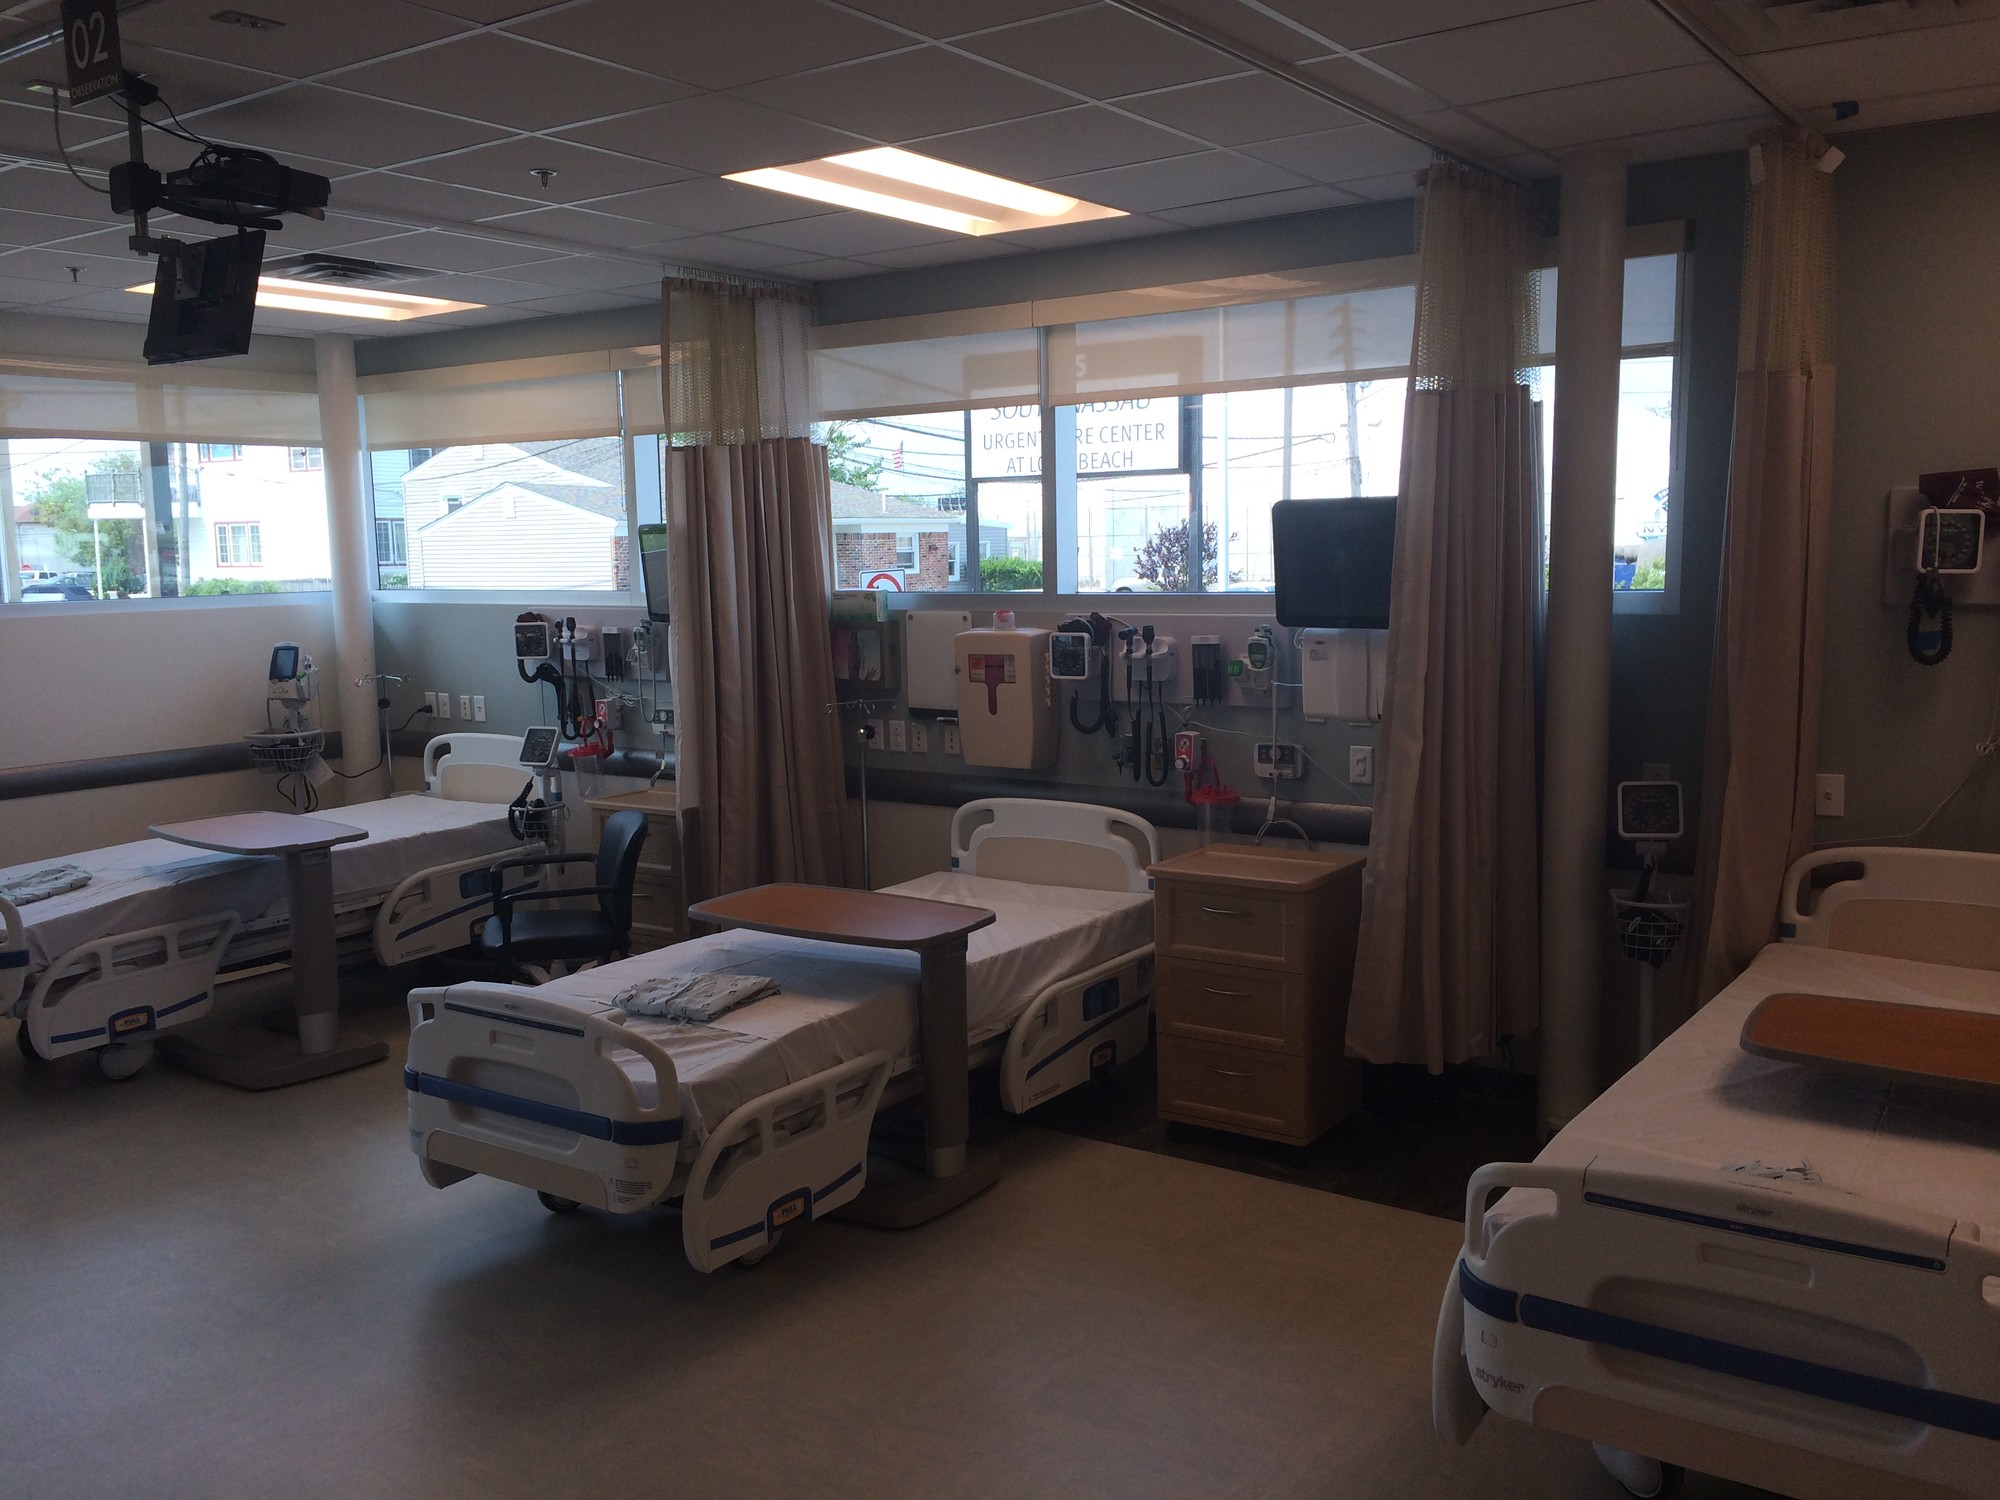 The three-bed observation unit that was added to the urgent-care center during its recent upgrade.